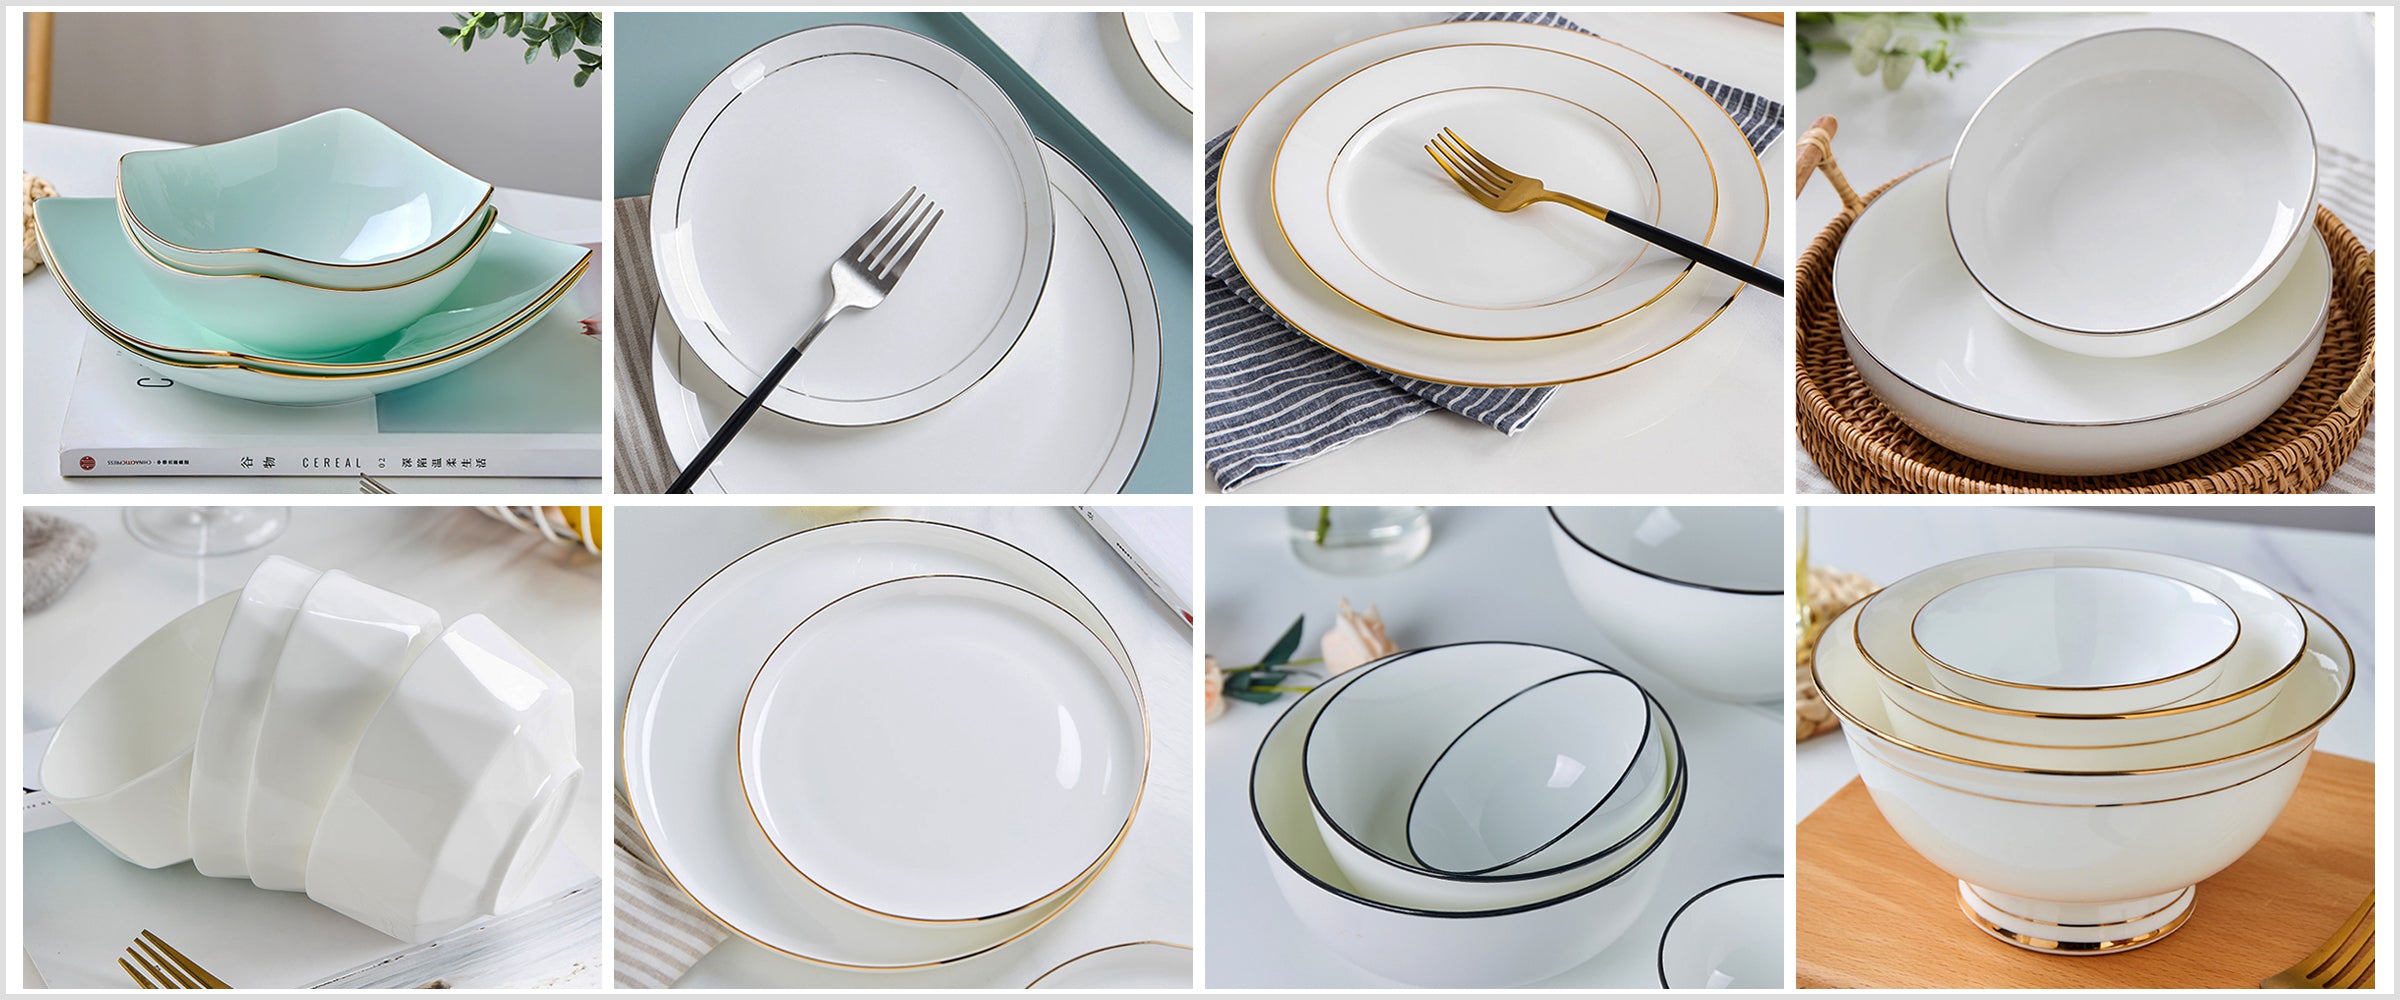 Bone China Tableware. Enhance Your Kitchen with Stylish and Functional Pieces, Discover the Ultimate Selection of Dinner Dishes and Bowls.